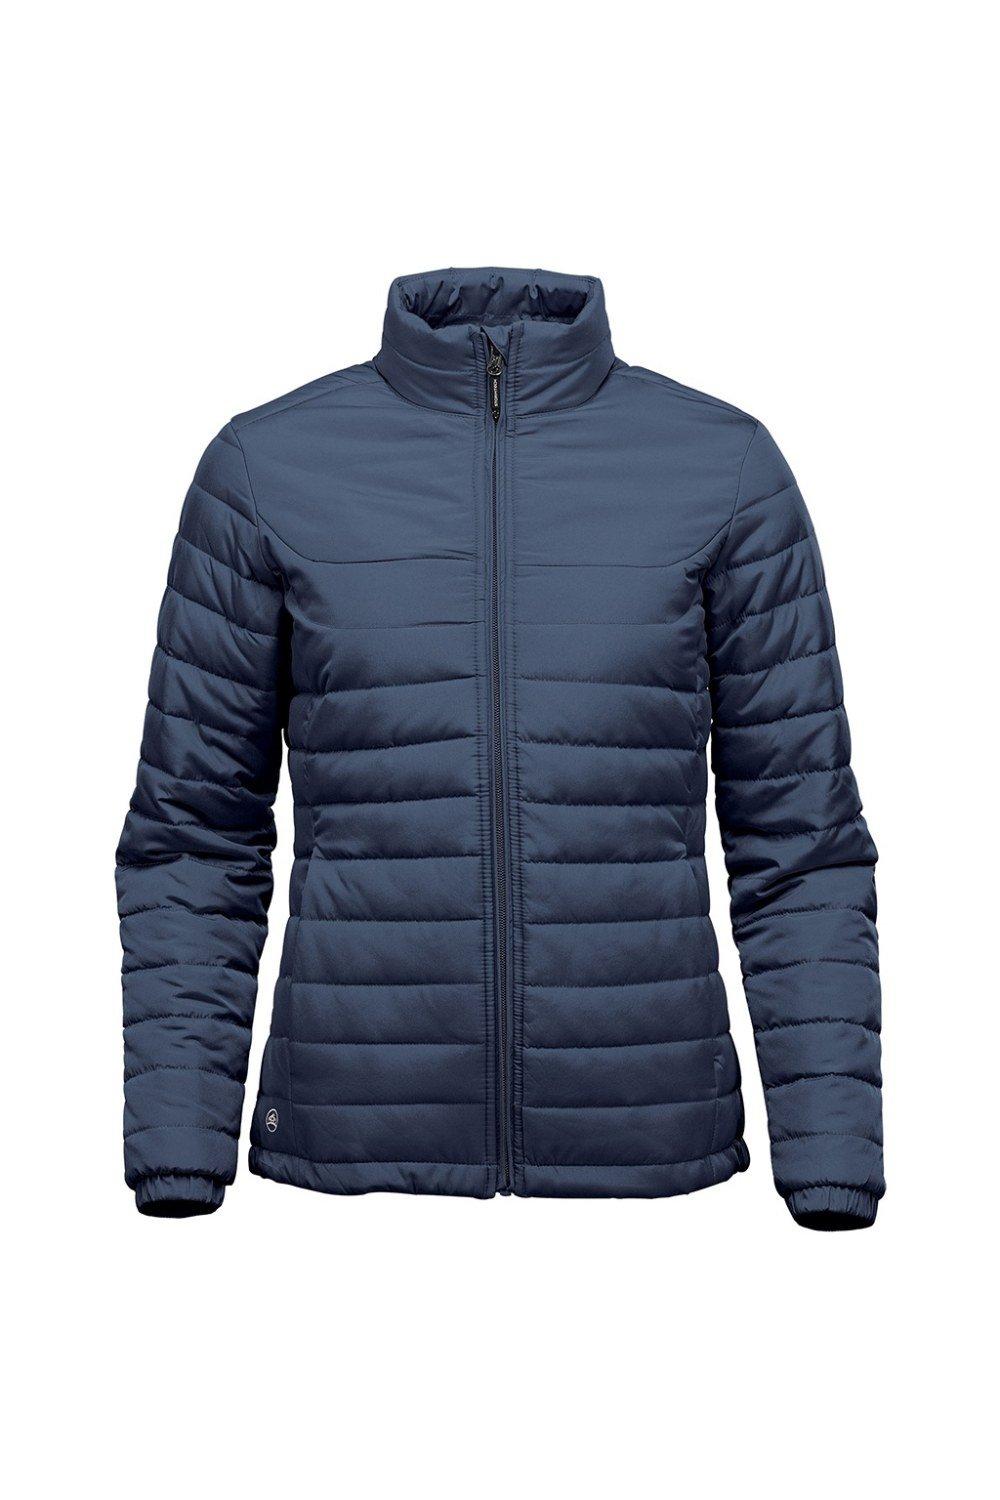 Stormtech Women's Nautilus Quilted Padded Jacket|Size: S|navy